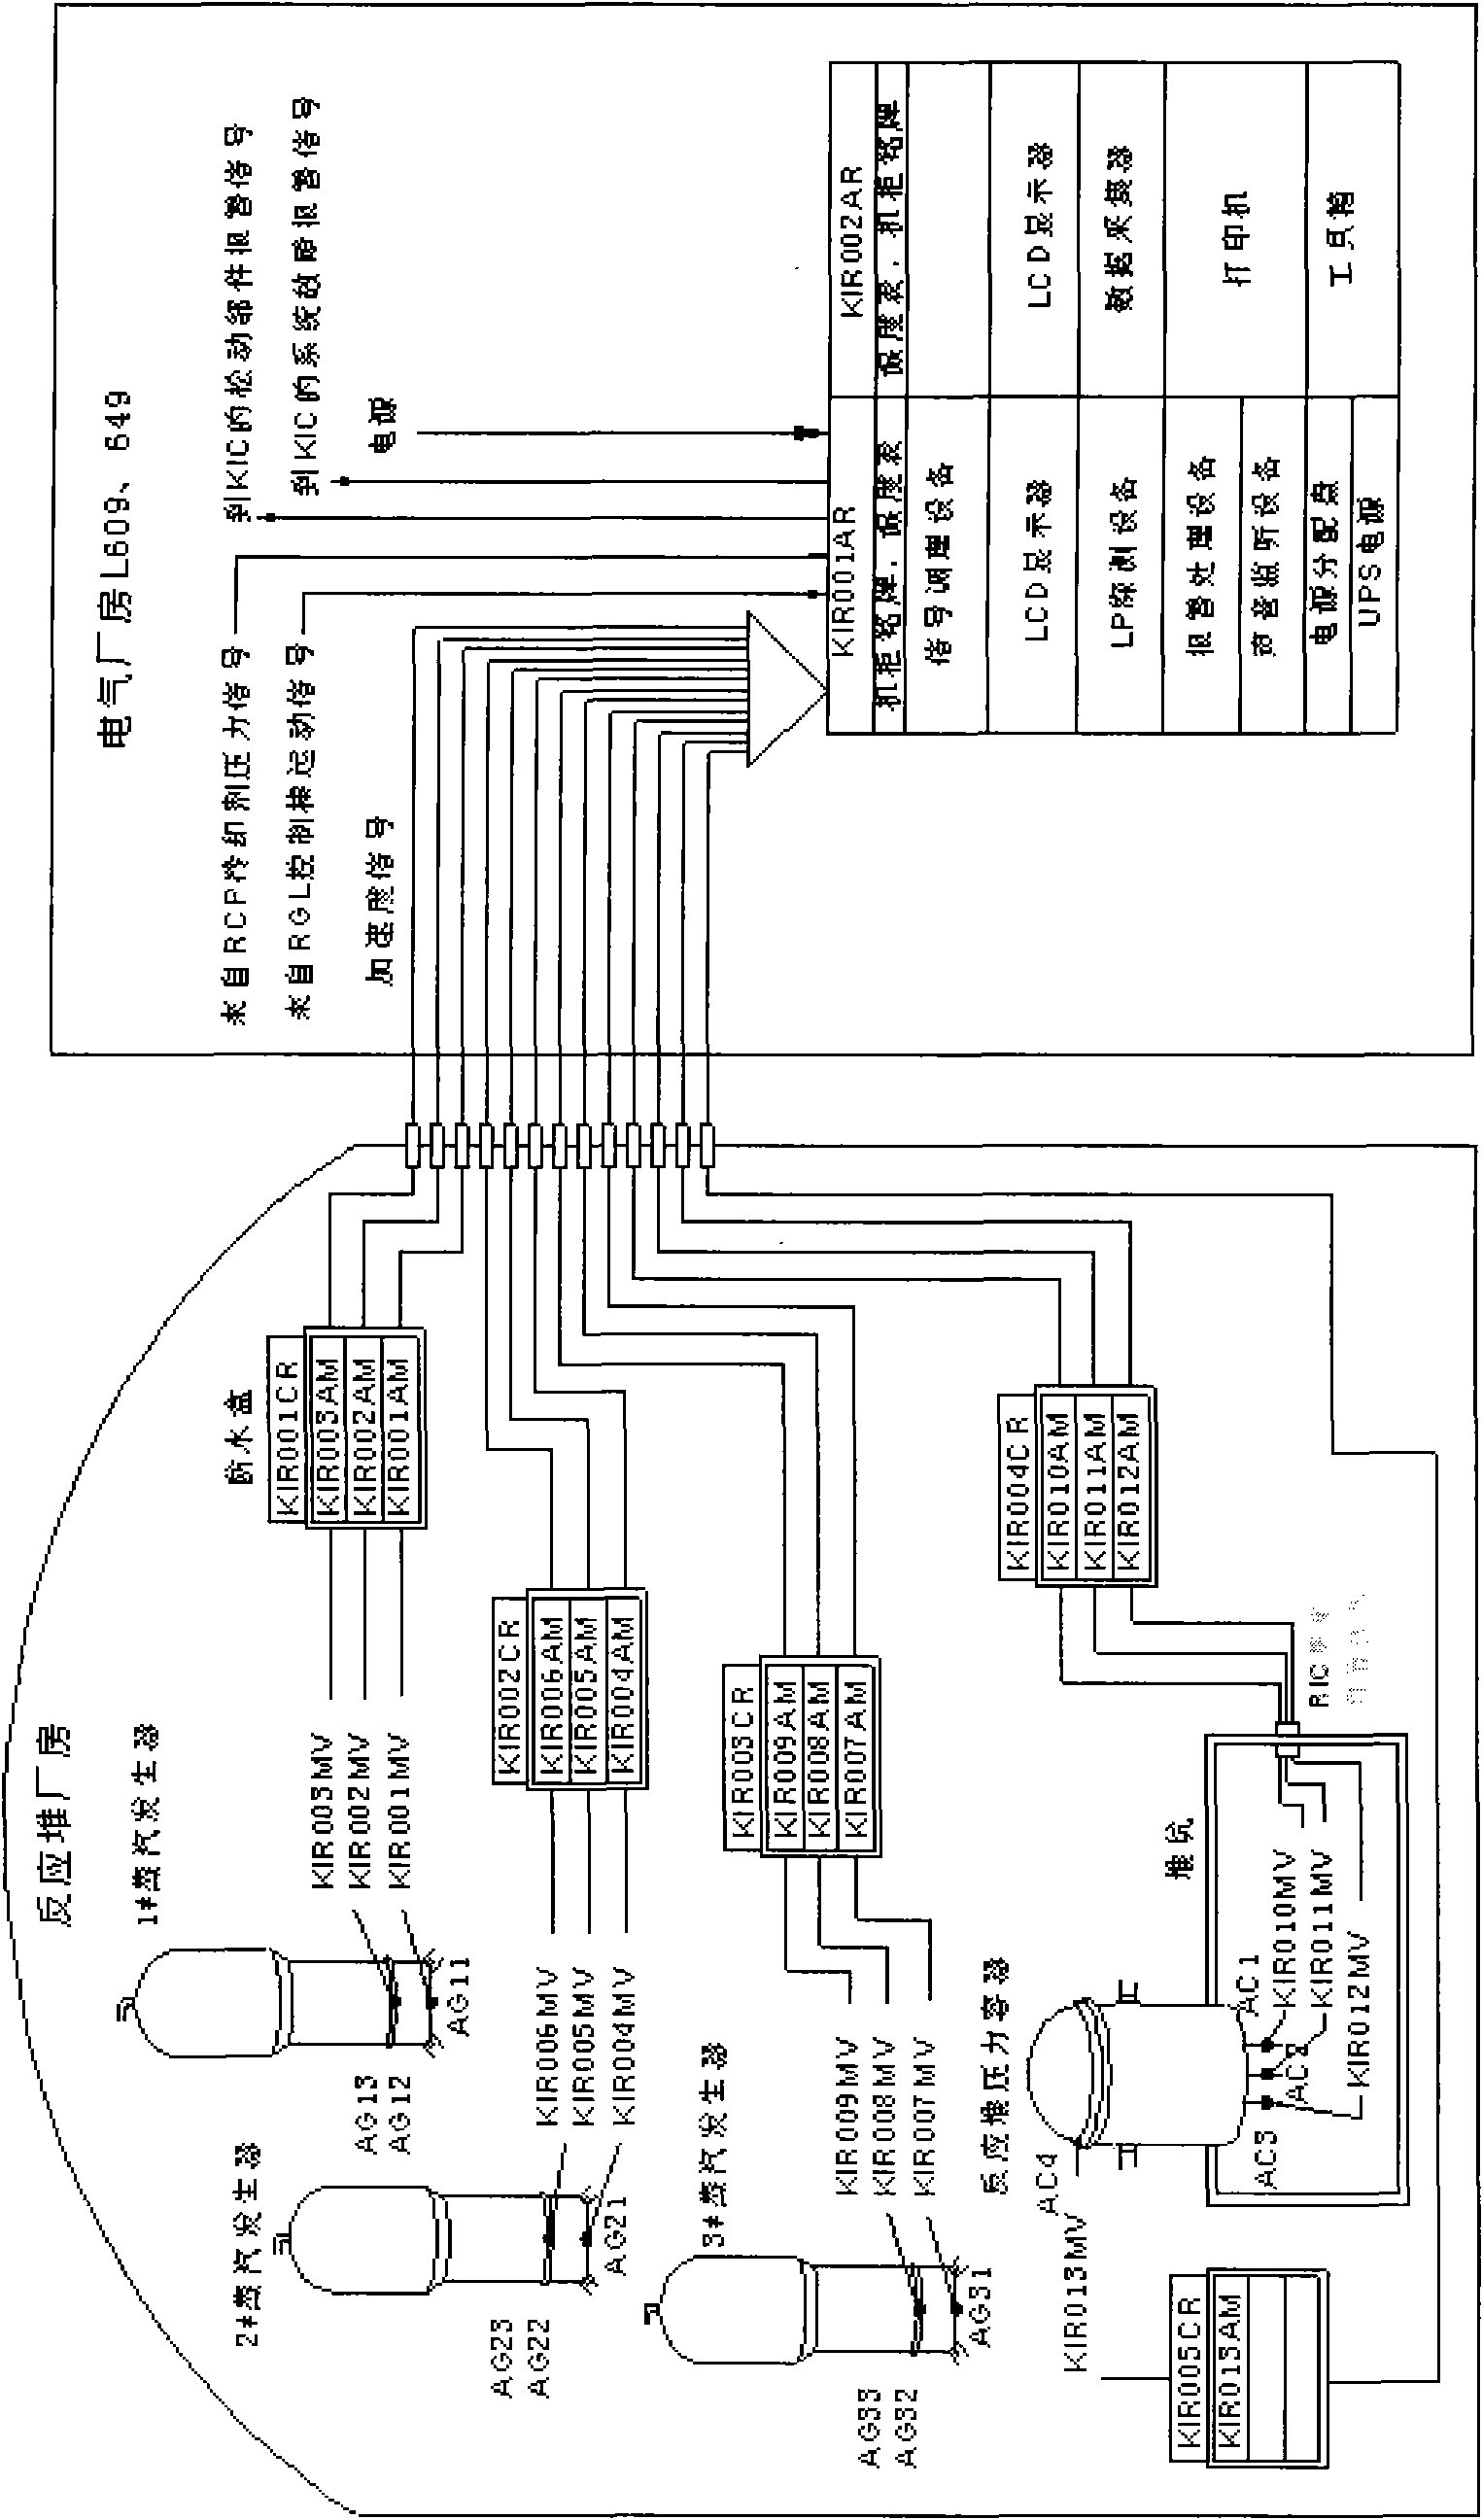 System for monitoring loosening part of nuclear reactor and coolant system